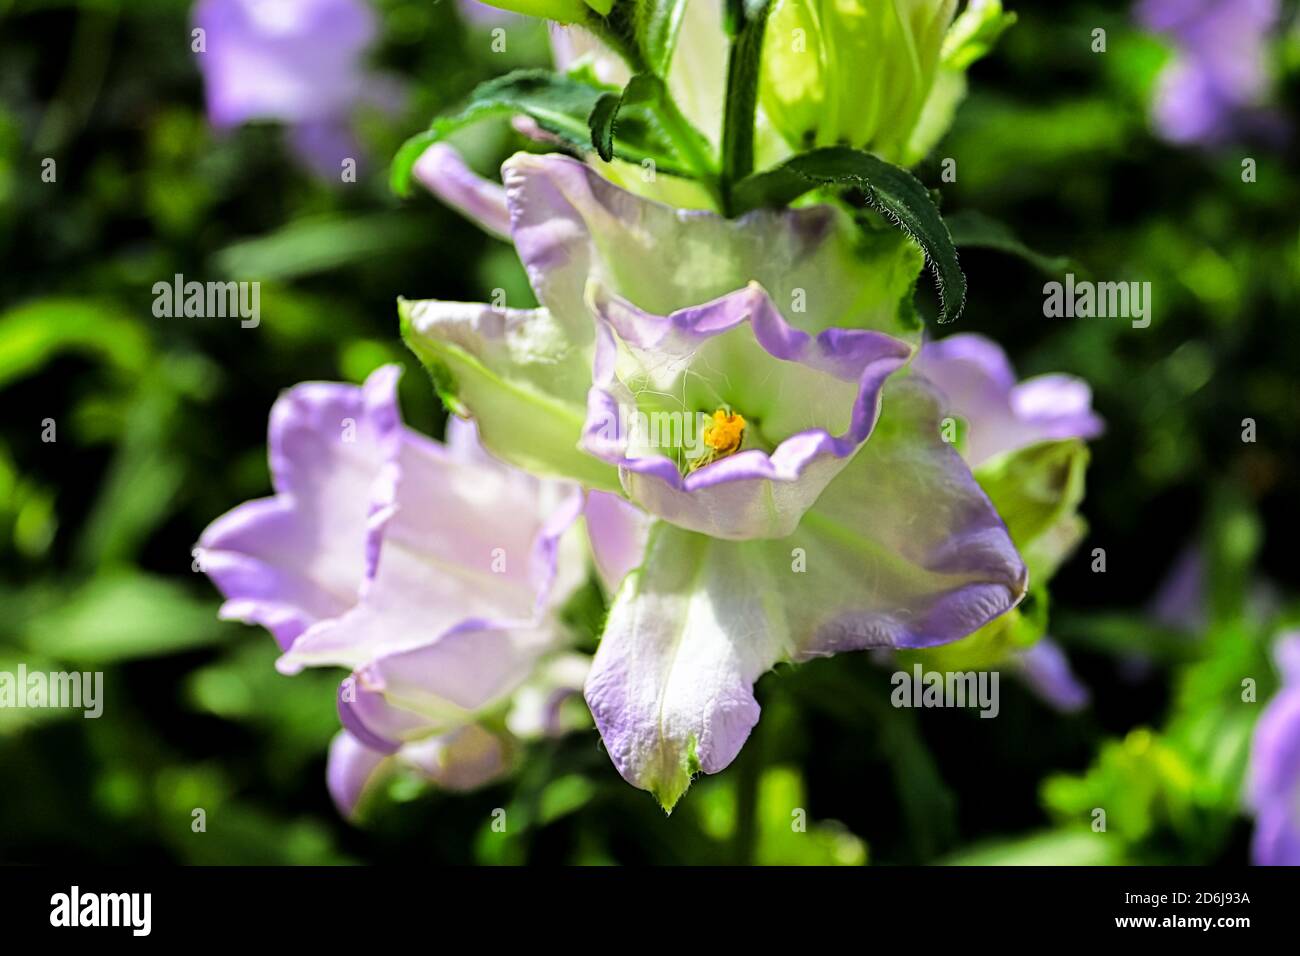 Top view of a blooming bellflowers with a leafy background Stock Photo